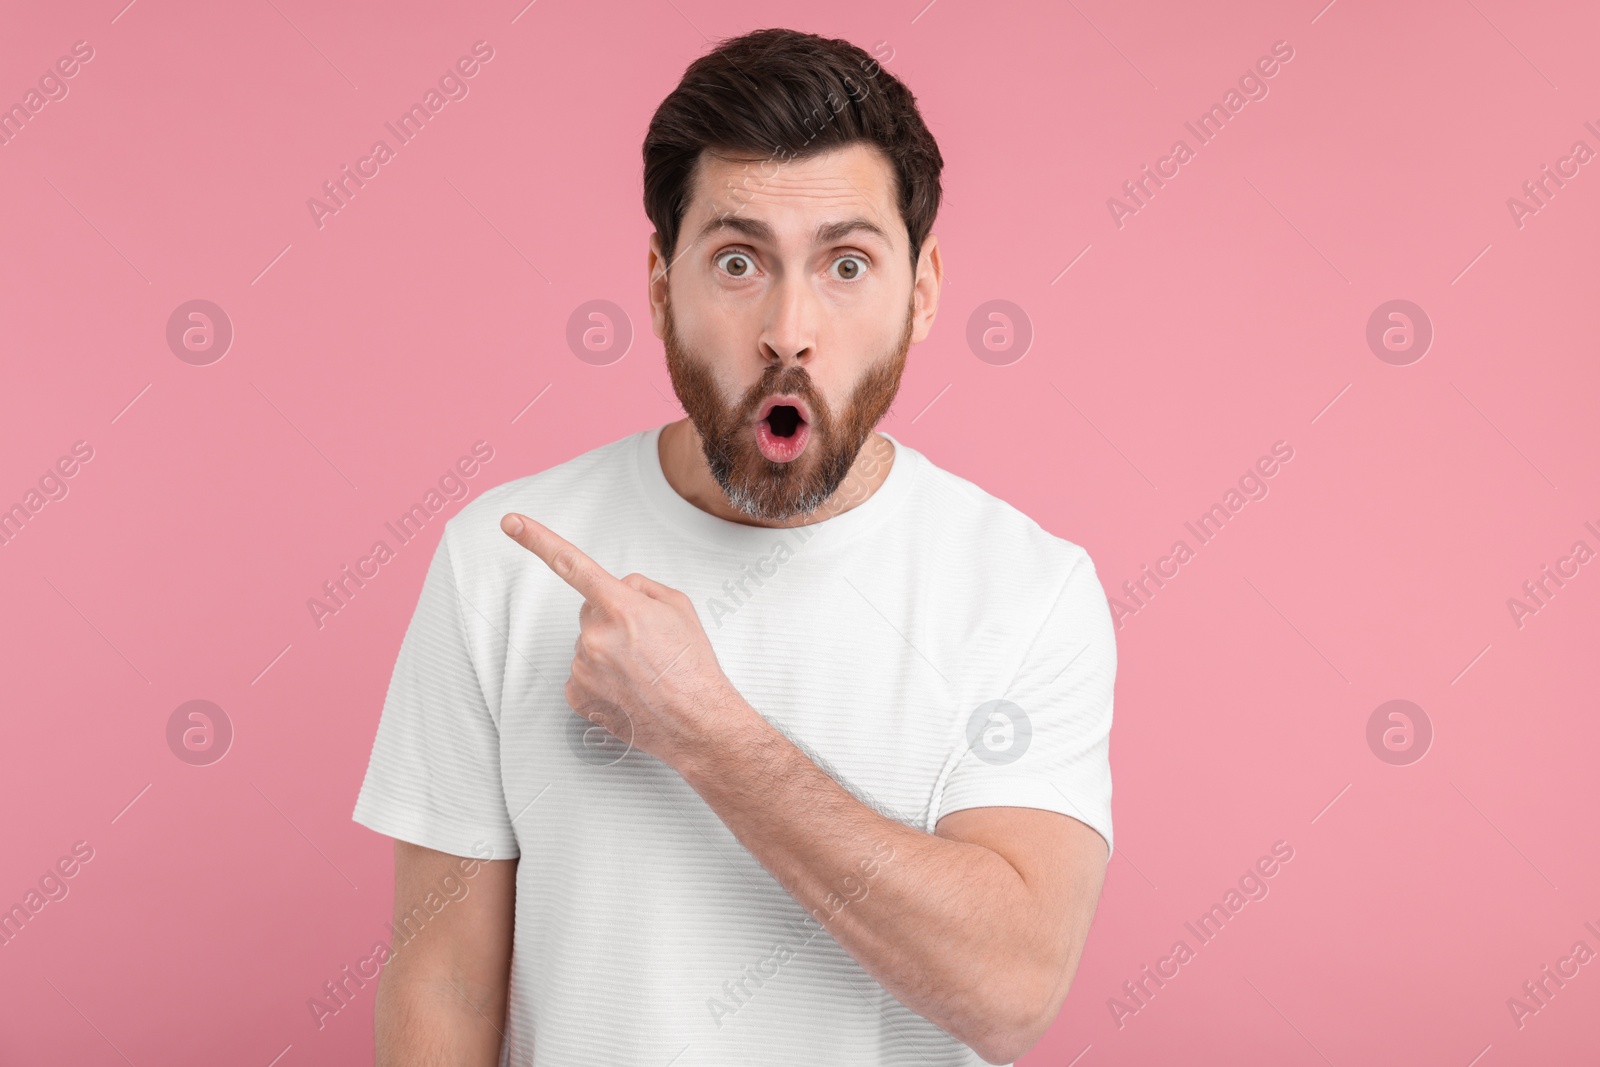 Photo of Surprised man pointing at something on pink background